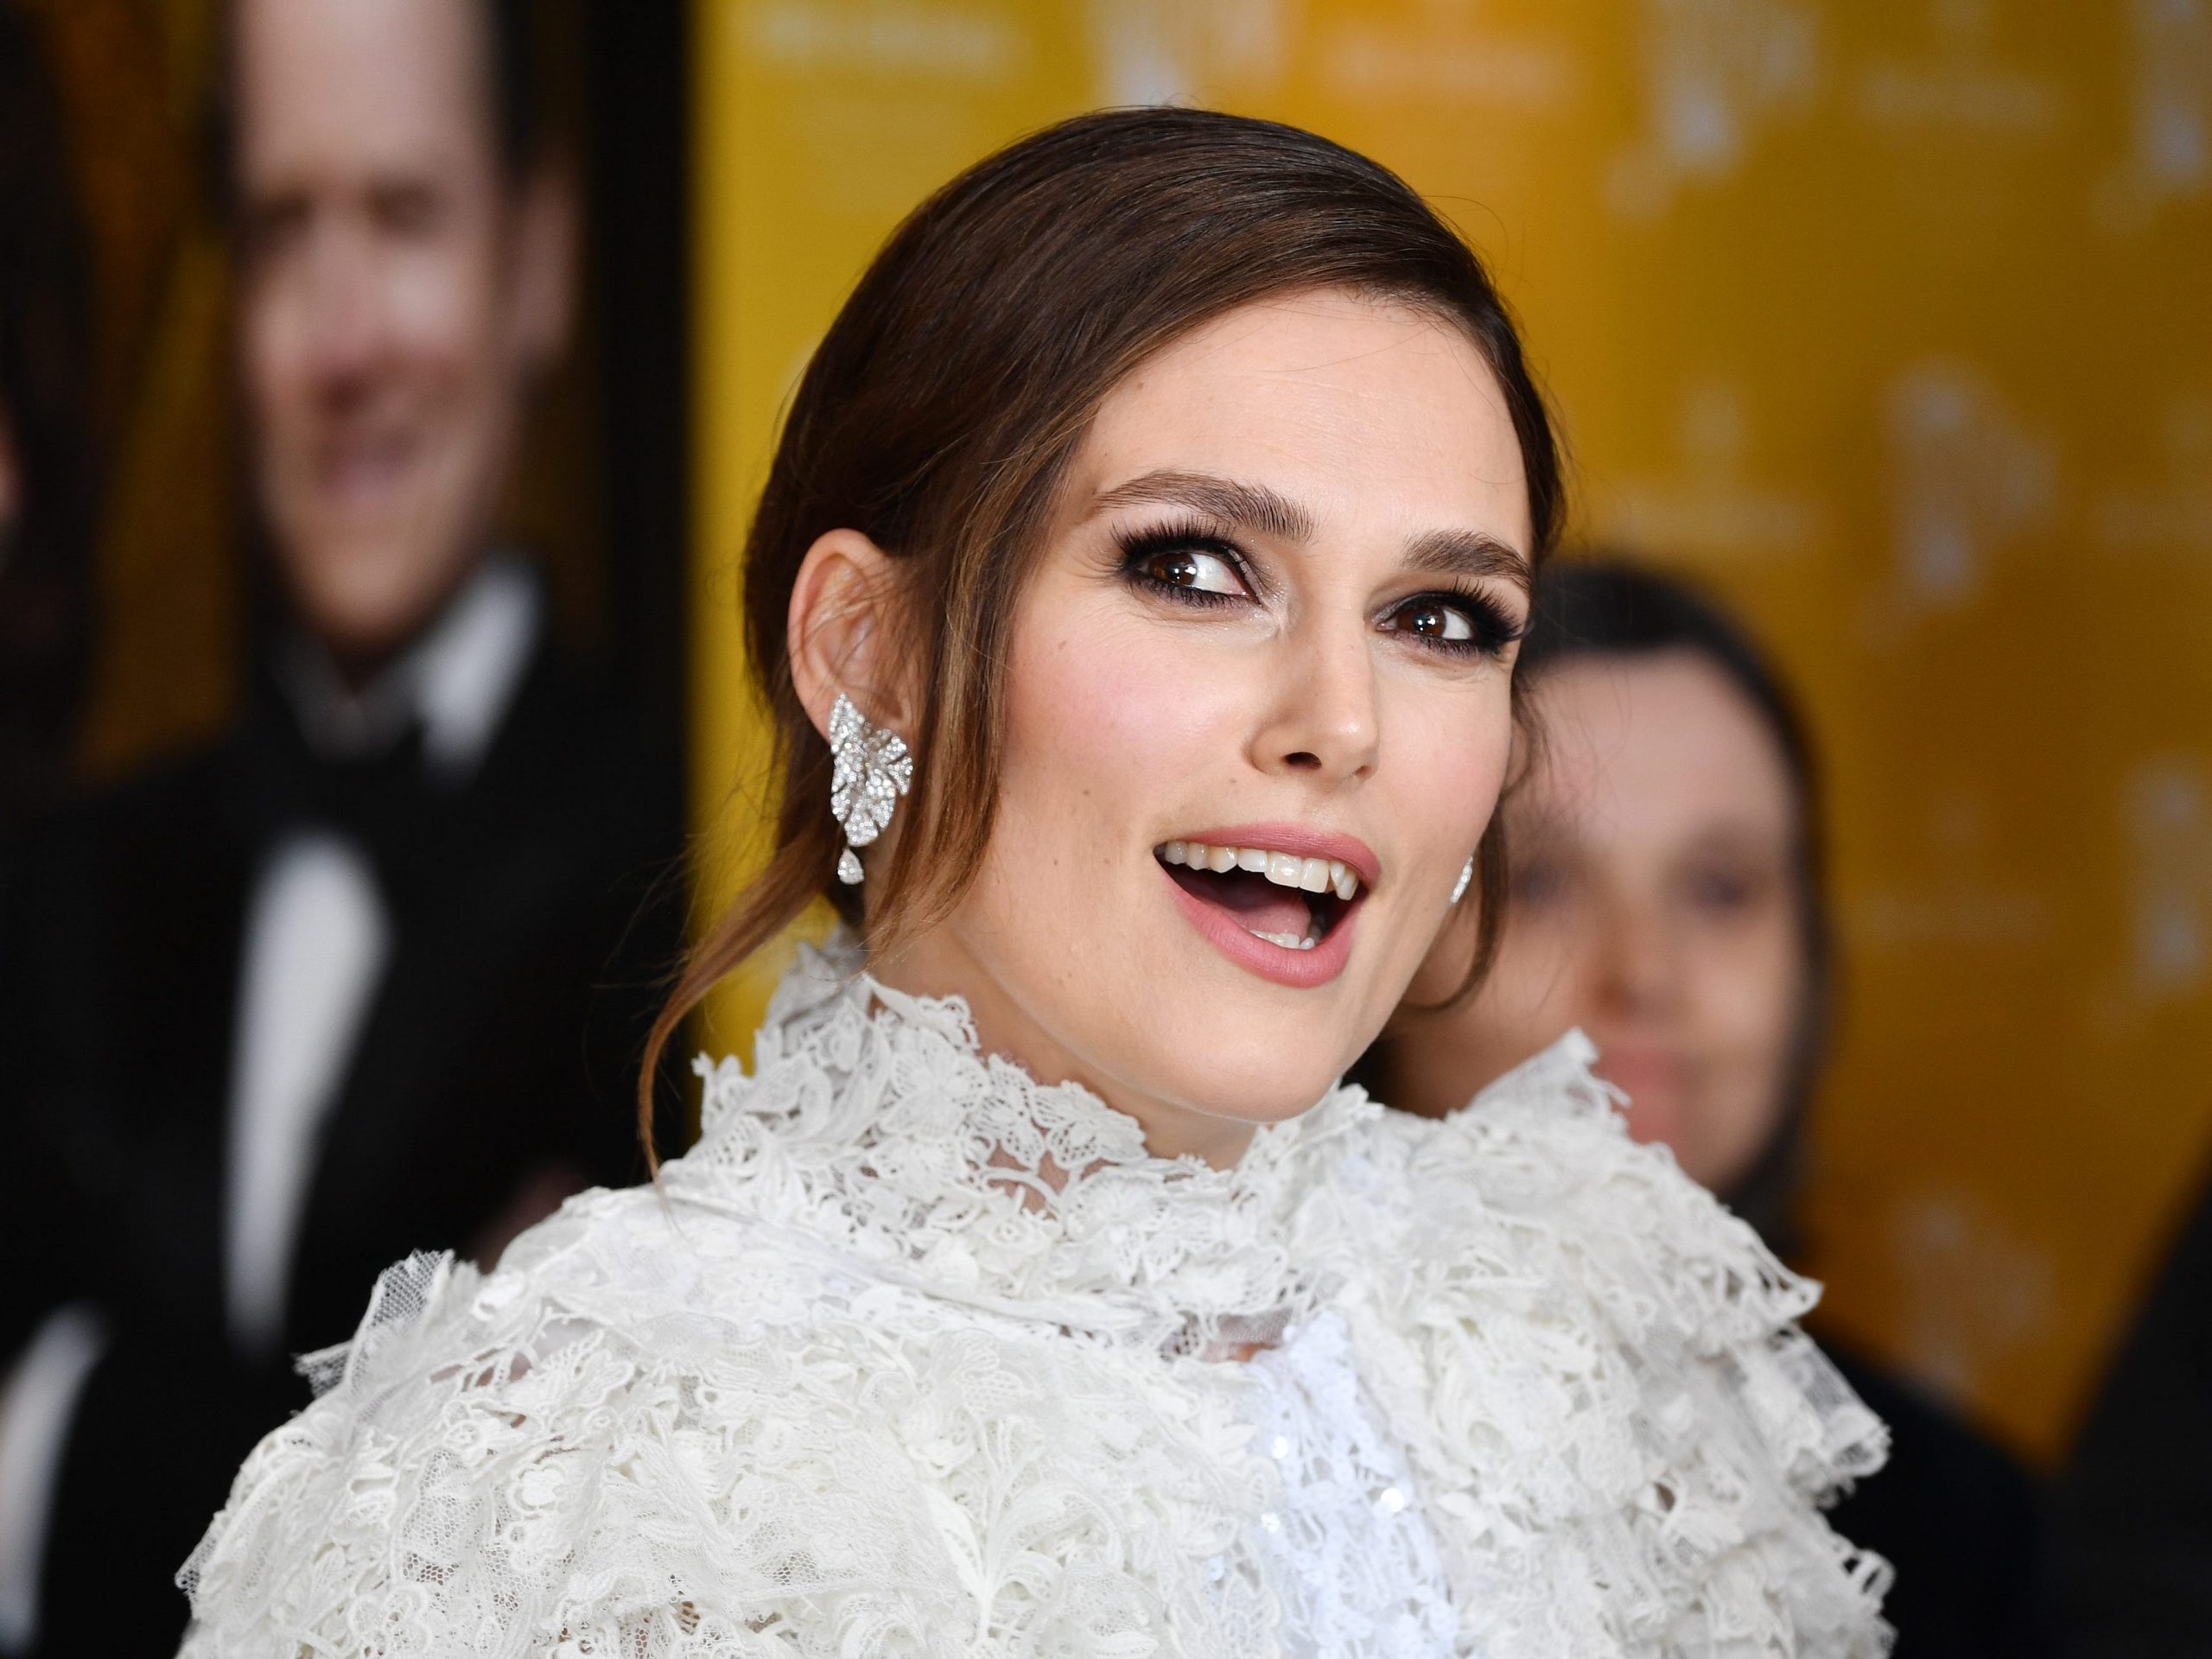 Keira Knightley attends the "Misbehaviour" World Premiere at The Ham Yard Hotel, London.